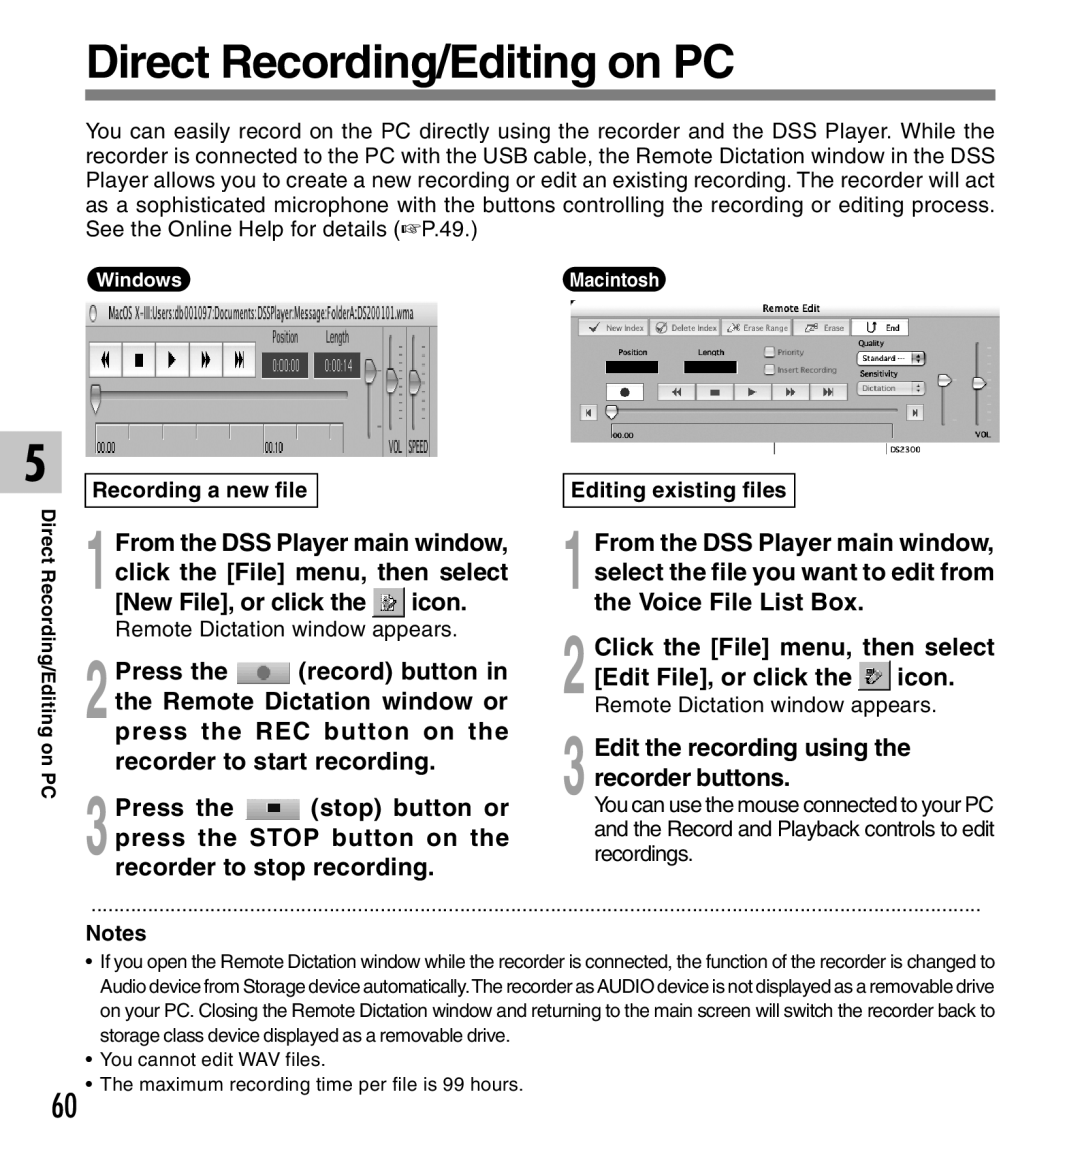 Olympus DS-2300 Direct Recording/Editing on PC, New File, or click Icon, Edit the recording using the recorder buttons 